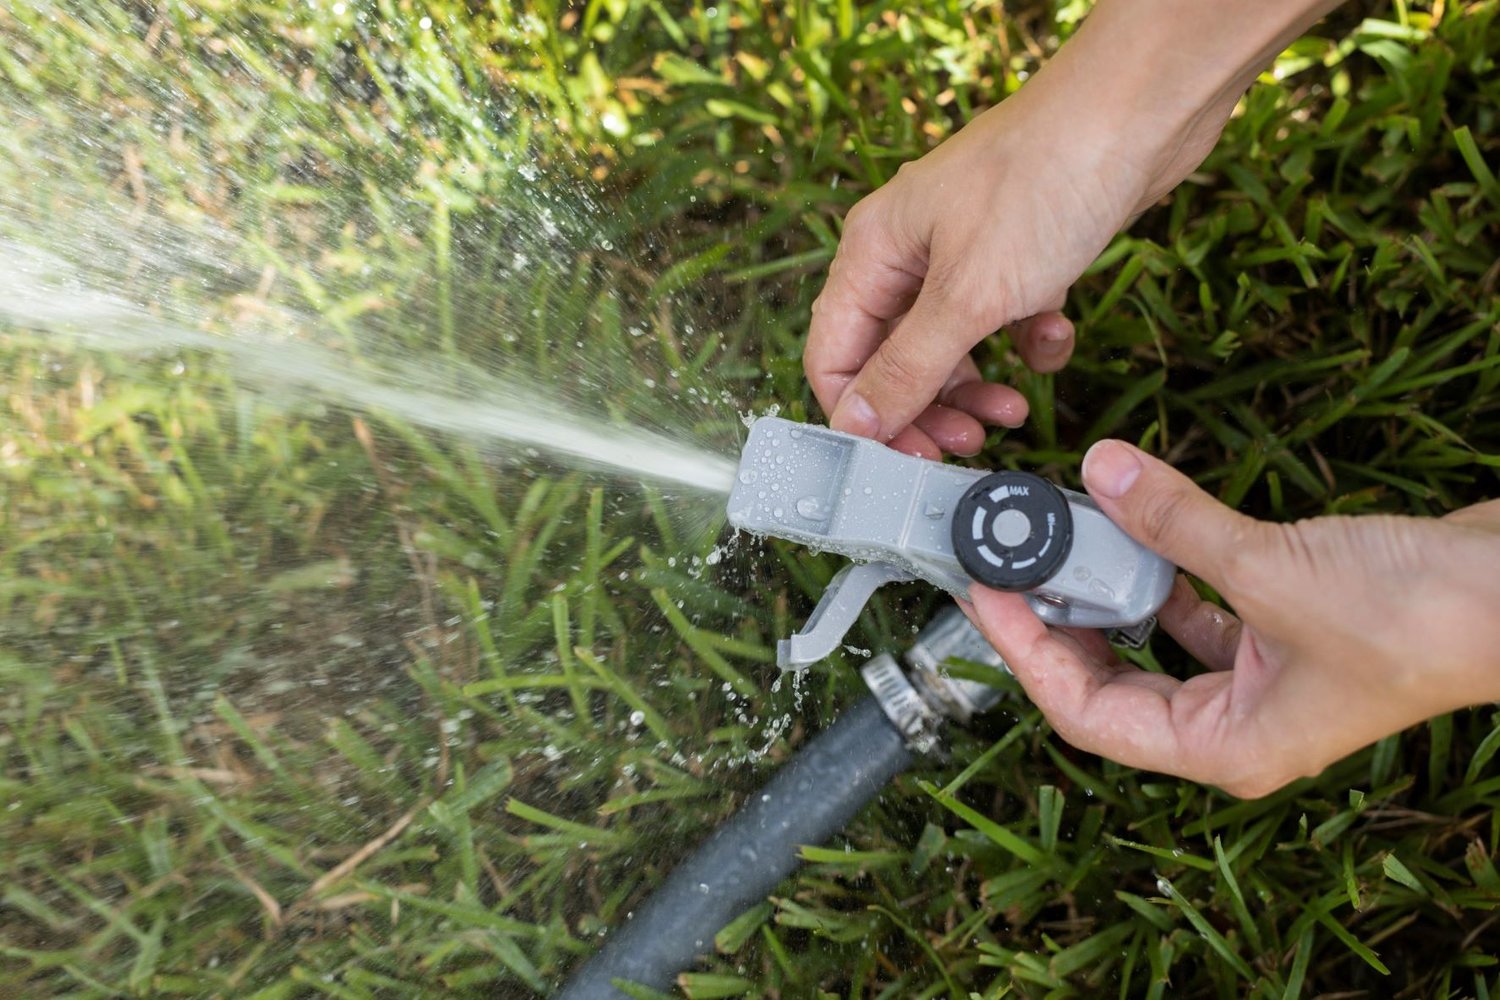 Science tells us that if you replace at least one-third of the irrigated area of your yard or landscape with non-irrigated beds, you could save an average of 50,000 gallons of water per year.